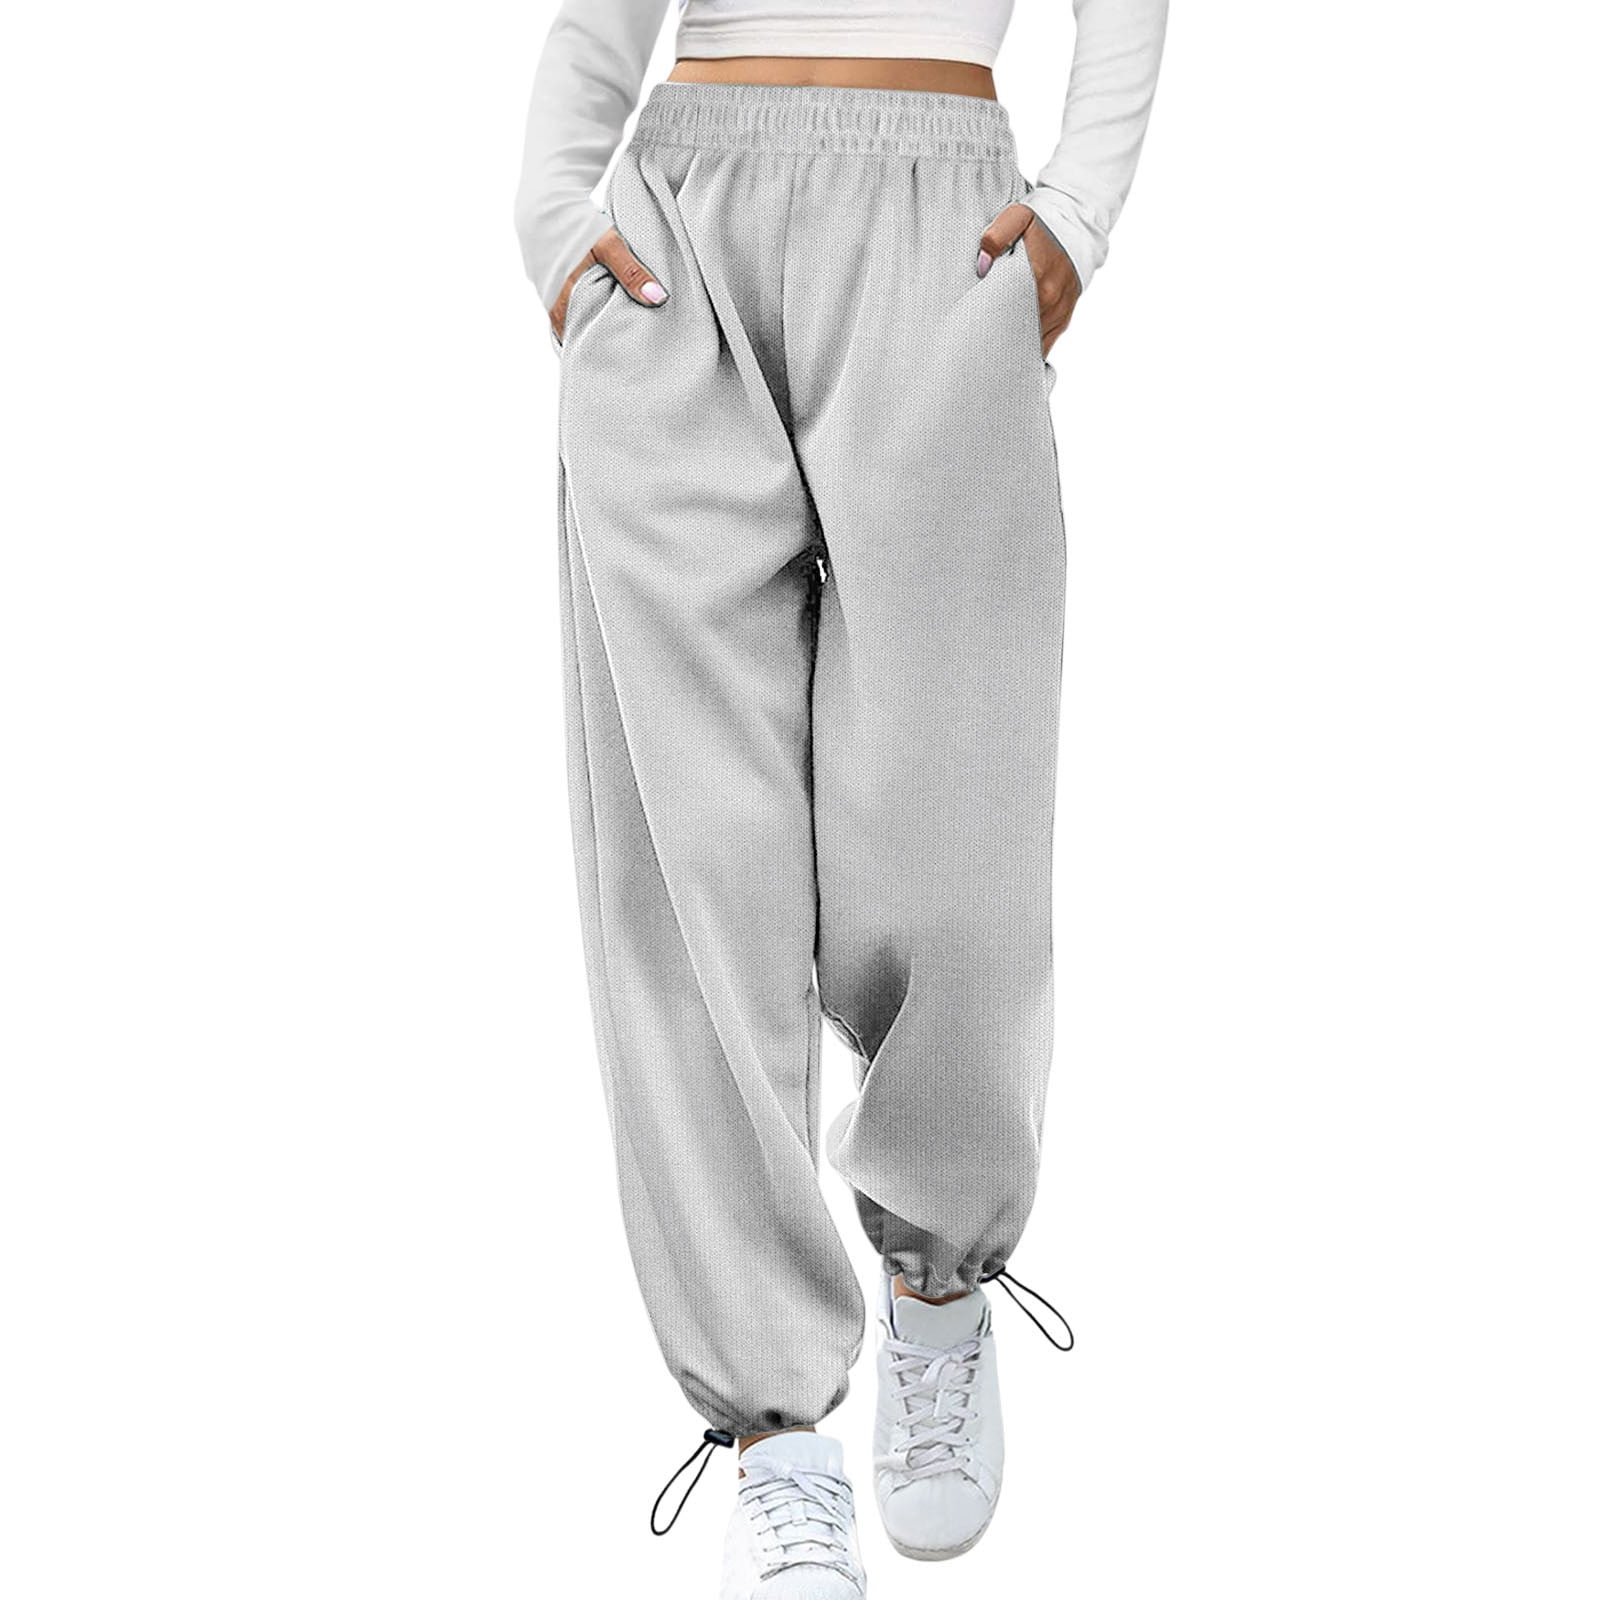 Womens Cotton with Pockets Fashion Wide Leg For Women Fashion Baggy Sweatpants  High Waisted Joggers Pants Trousers With Pockets Drawstring Track Pants  Womens Bottoms Fashion 